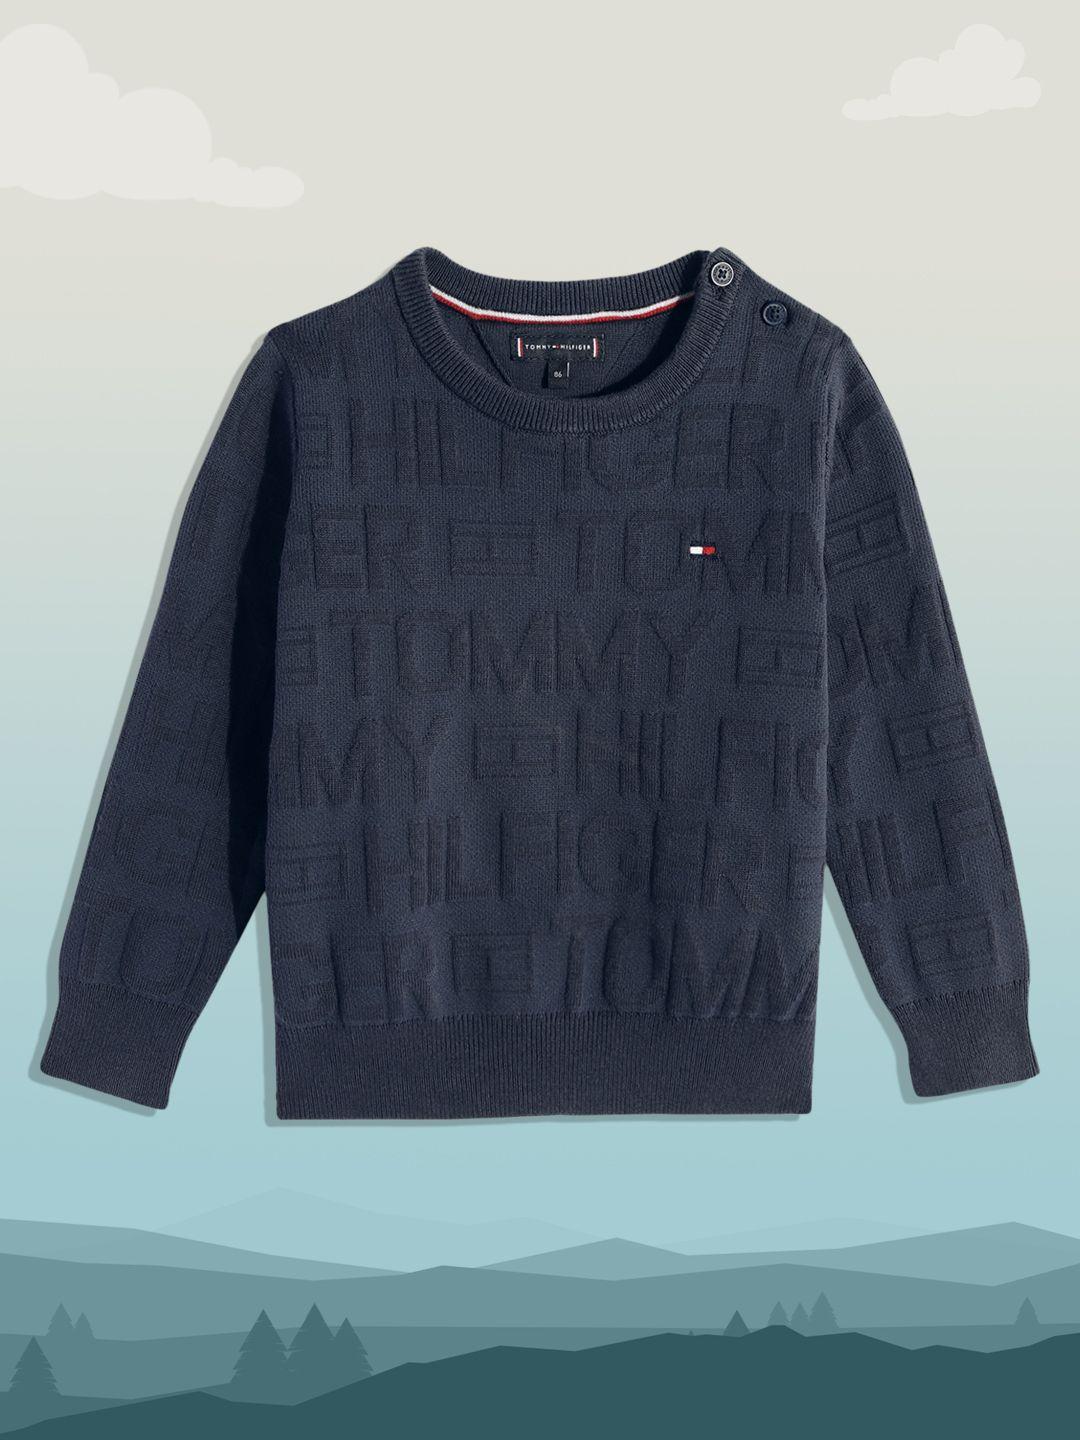 tommy-hilfiger-boys-navy-blue-brand-logo-embroidered-pullover